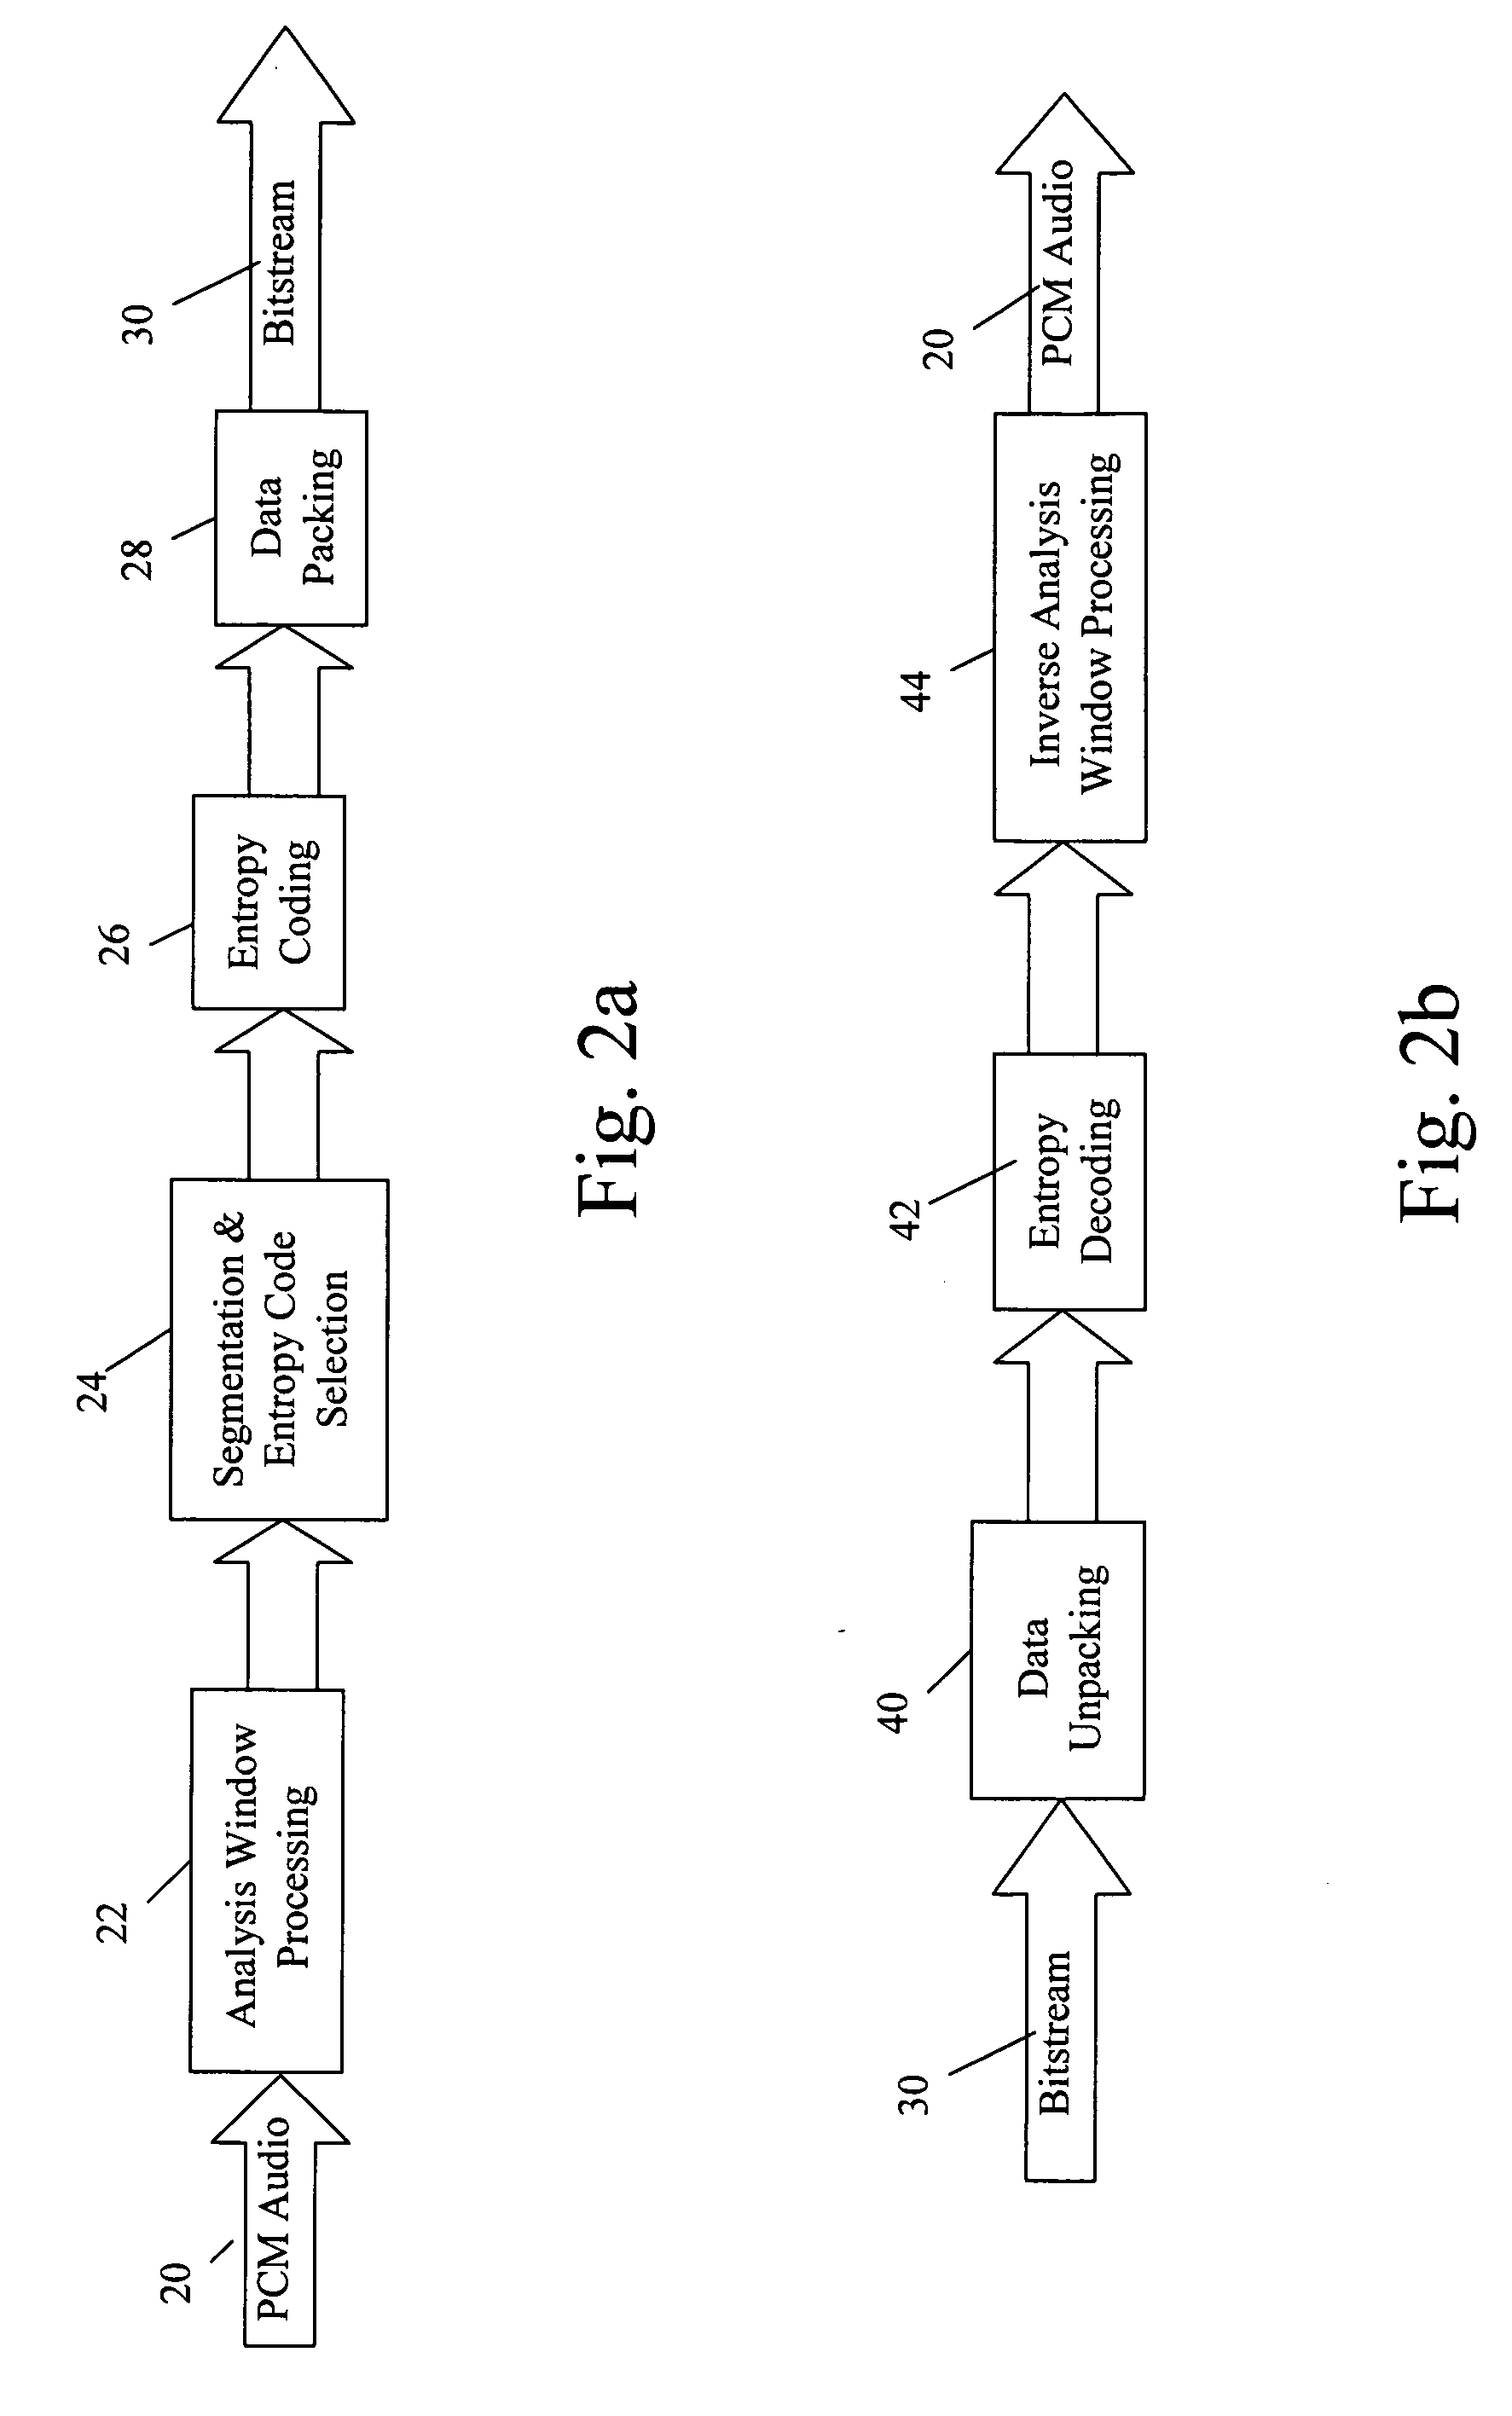 Lossless multi-channel audio codec using adaptive segmentation with random access point (RAP) and multiple prediction parameter set (MPPS) capability